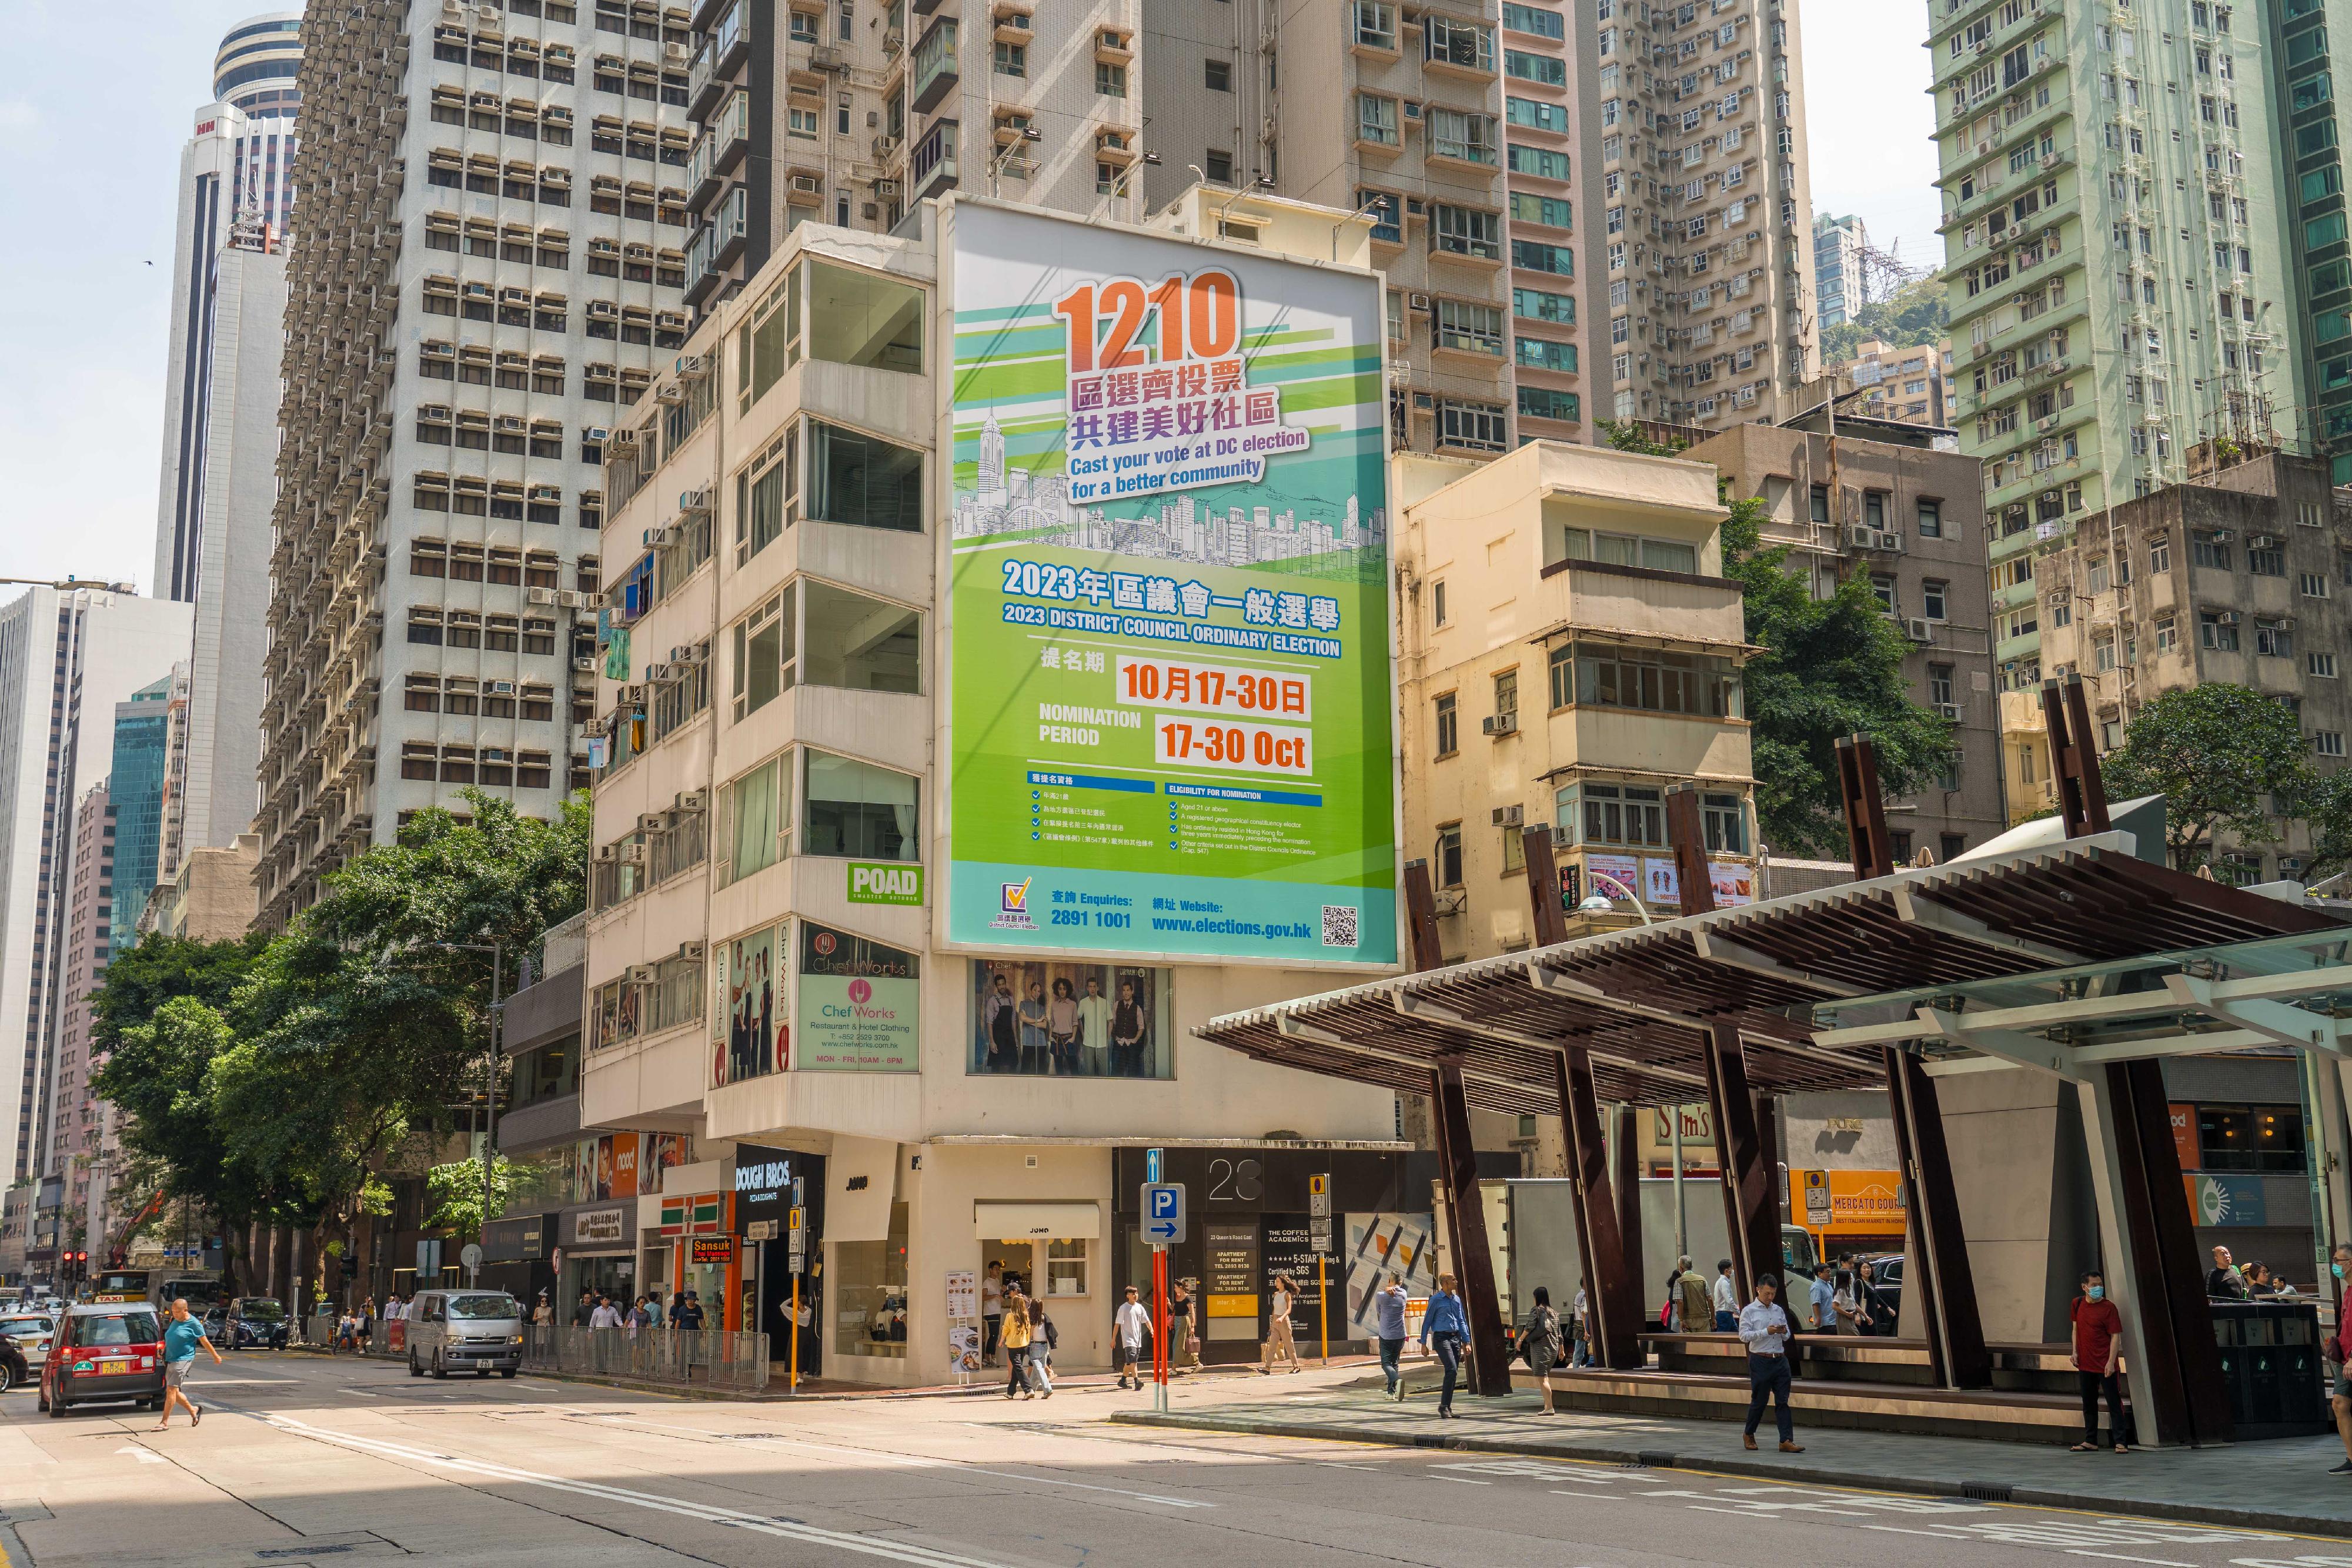 The 2023 District Council Ordinary Election will be held on December 10 (Sunday). The nomination period for the election started on October 17, and will continue until October 30. The Government has launched a publicity campaign for the nomination period that includes displays of giant banners in different districts.
